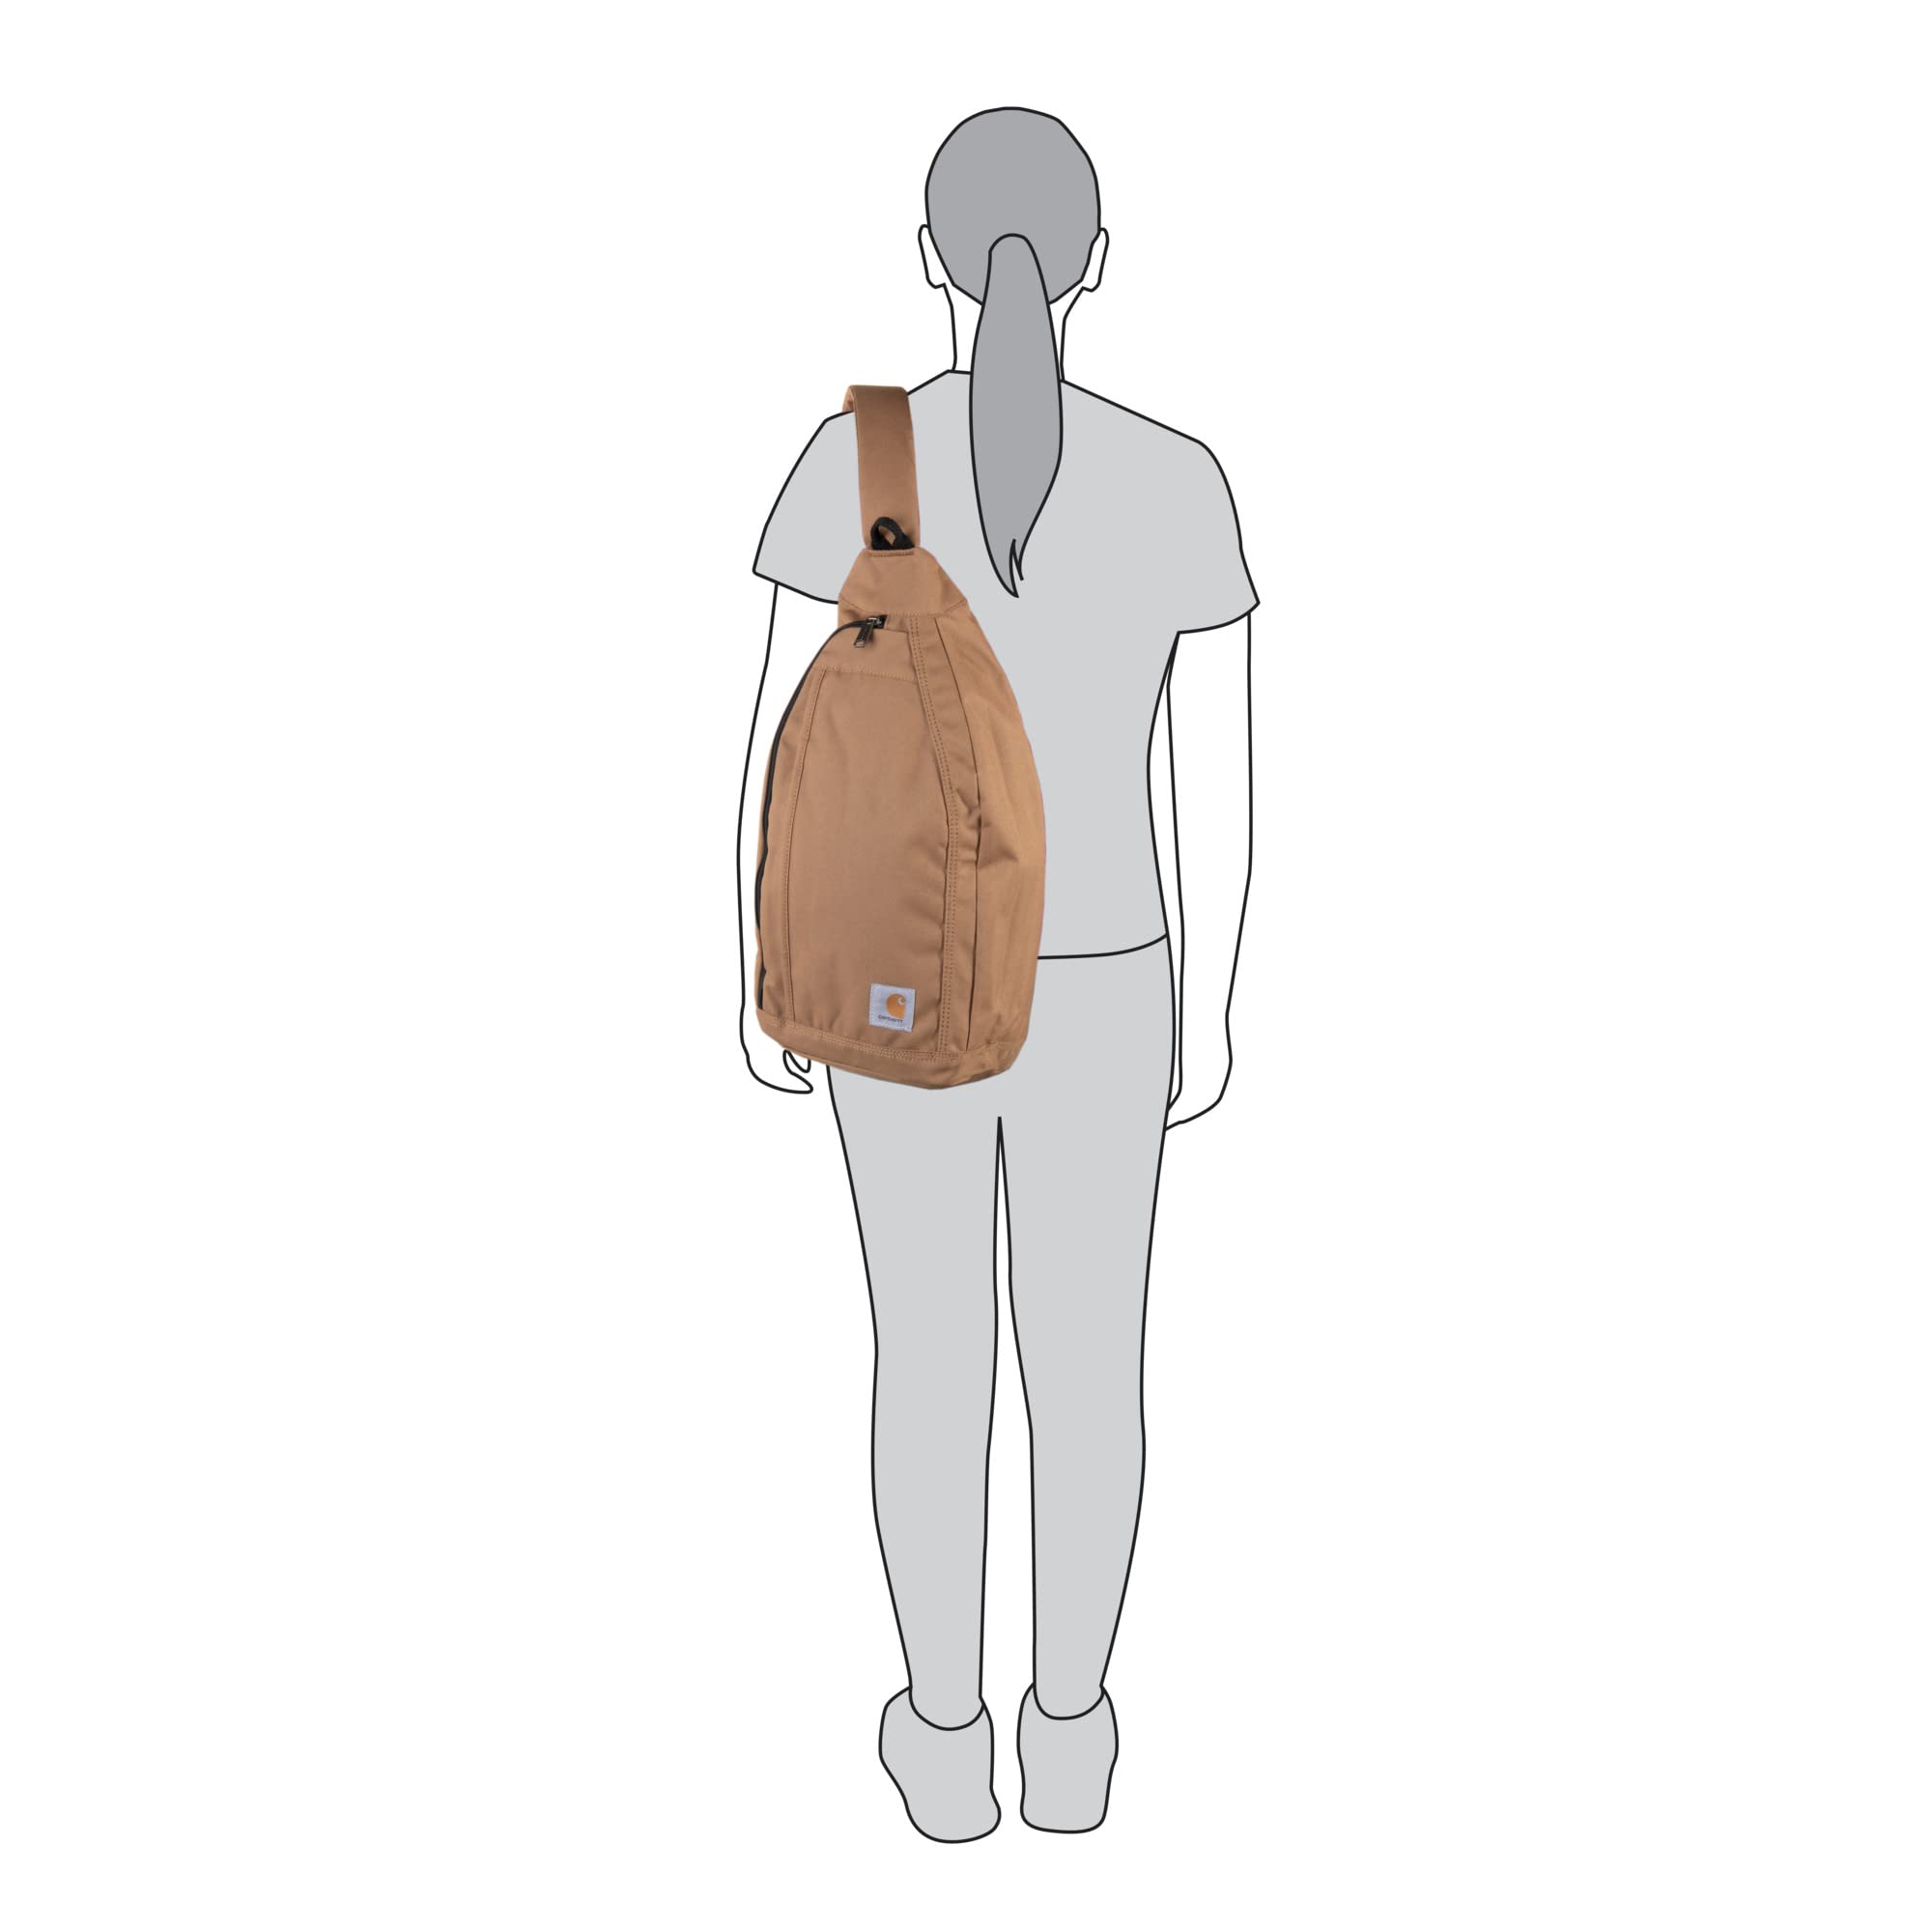 Carhartt Bag, Sling Crossbody Backpack with Side Release Buckle & Tablet Sleeve, Wine, One Size